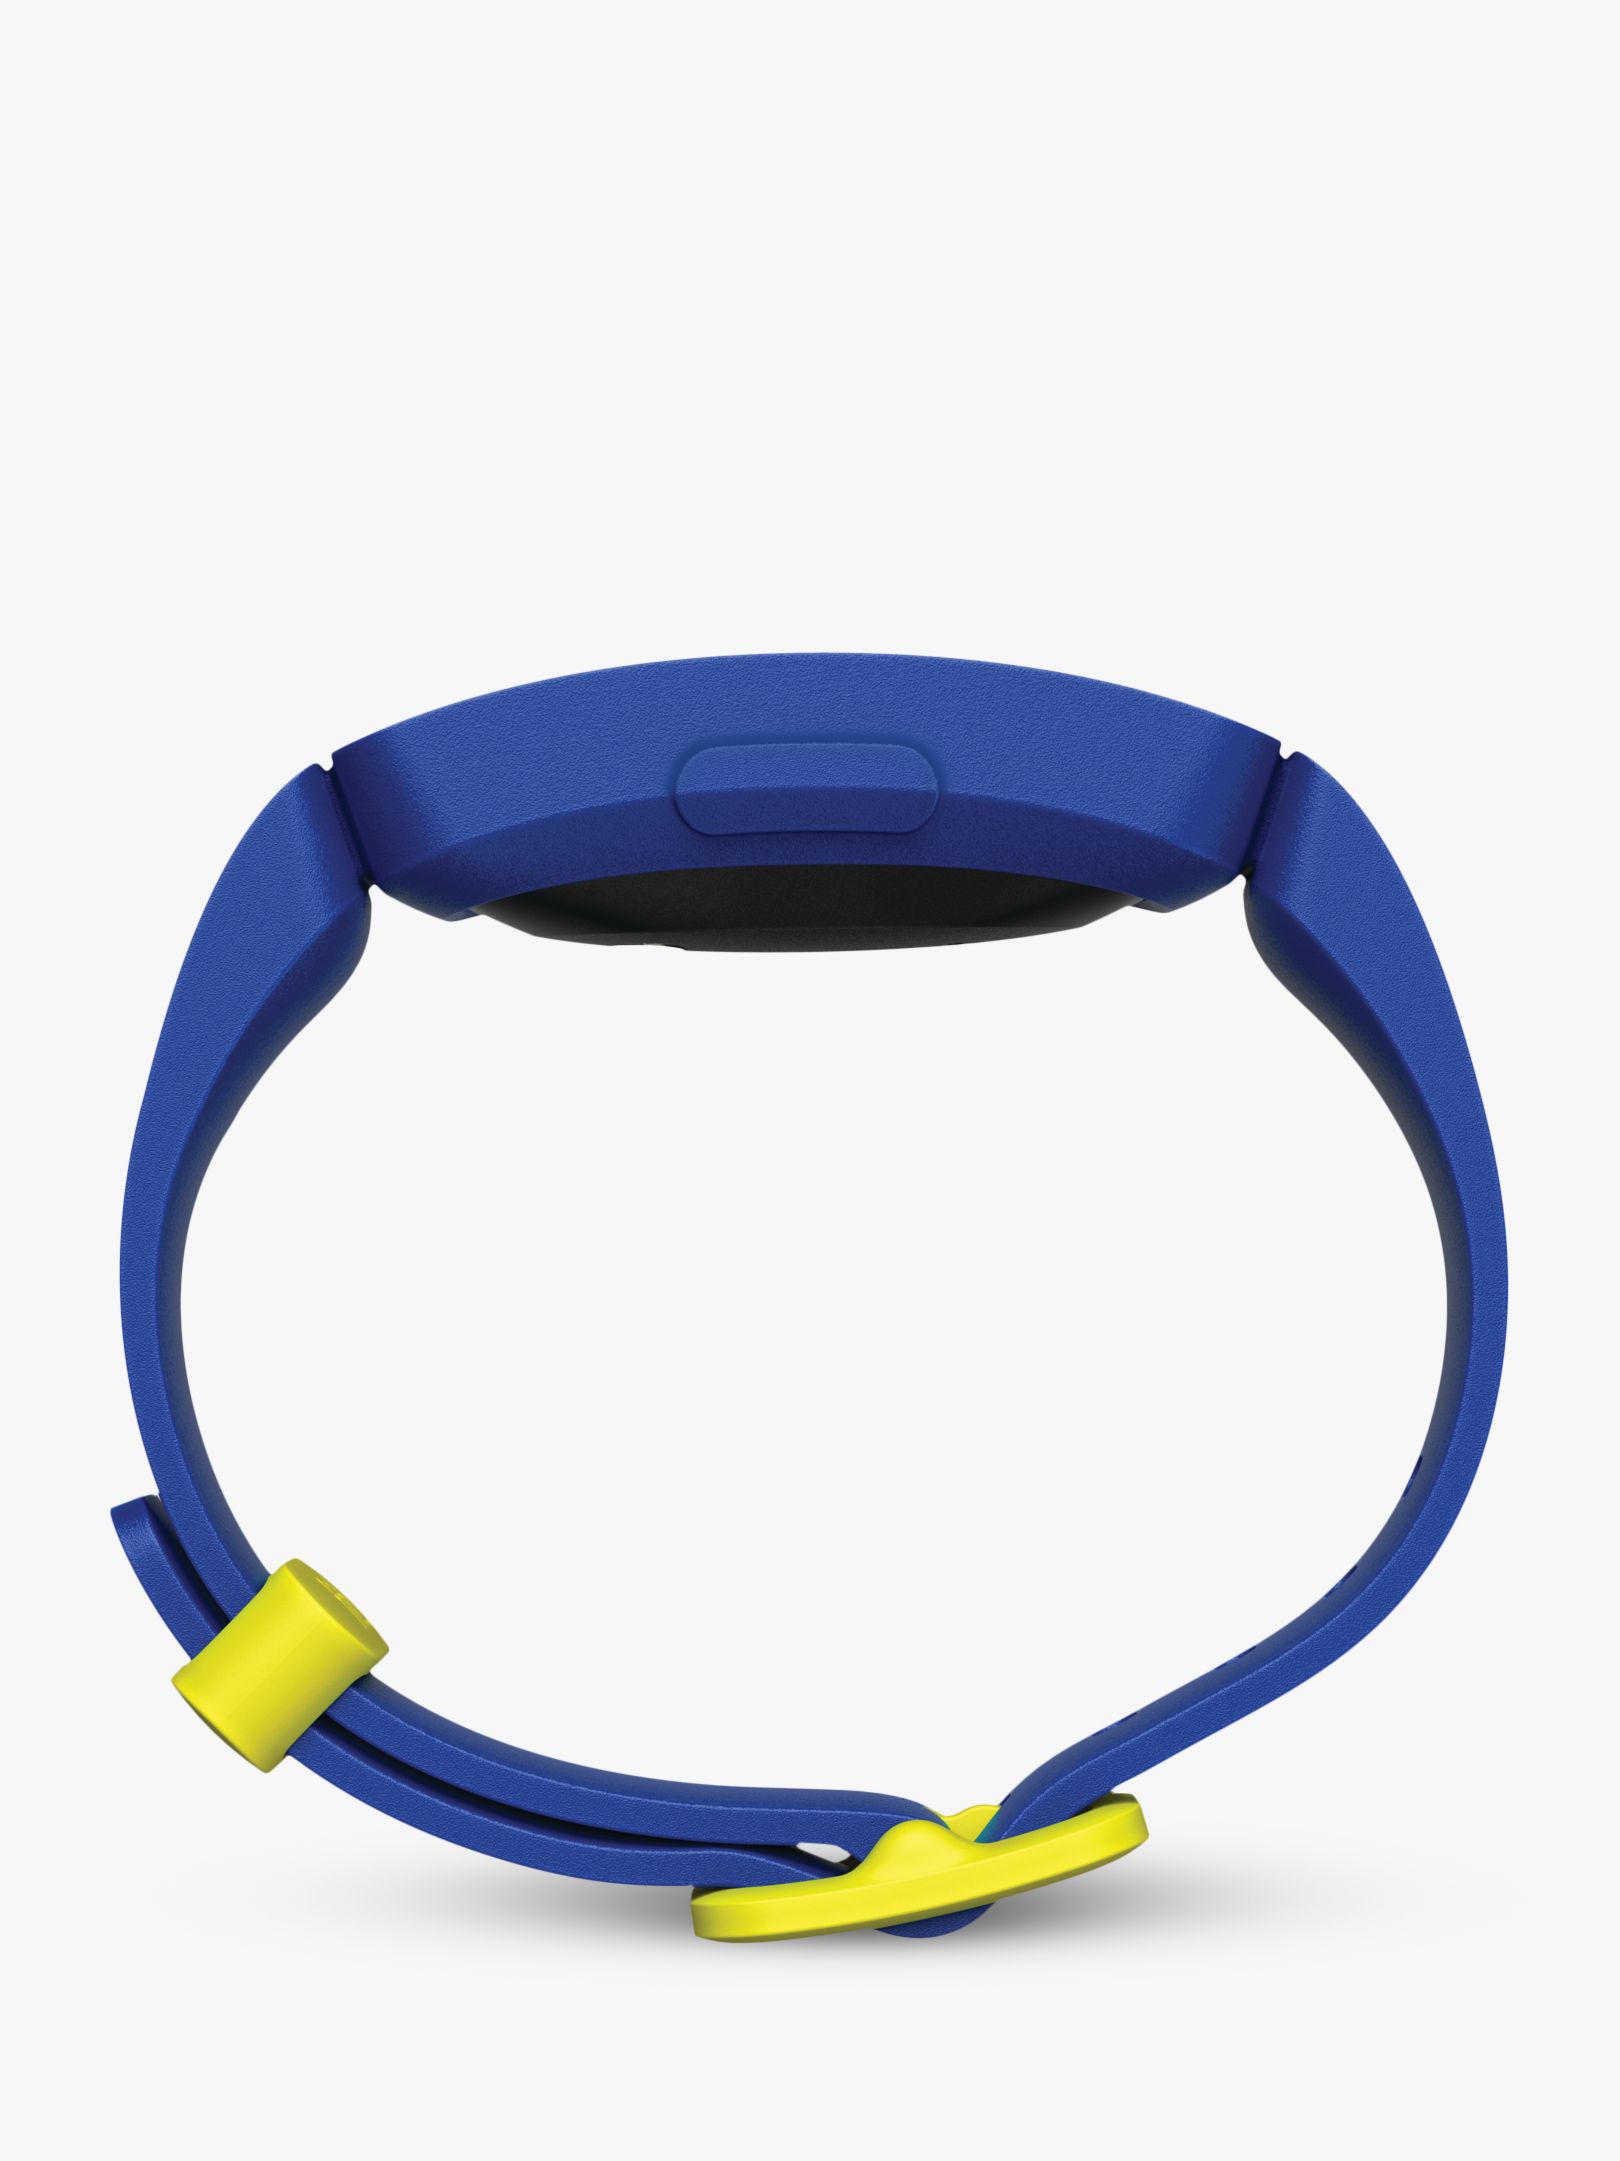 fitbit ace 2 wristband